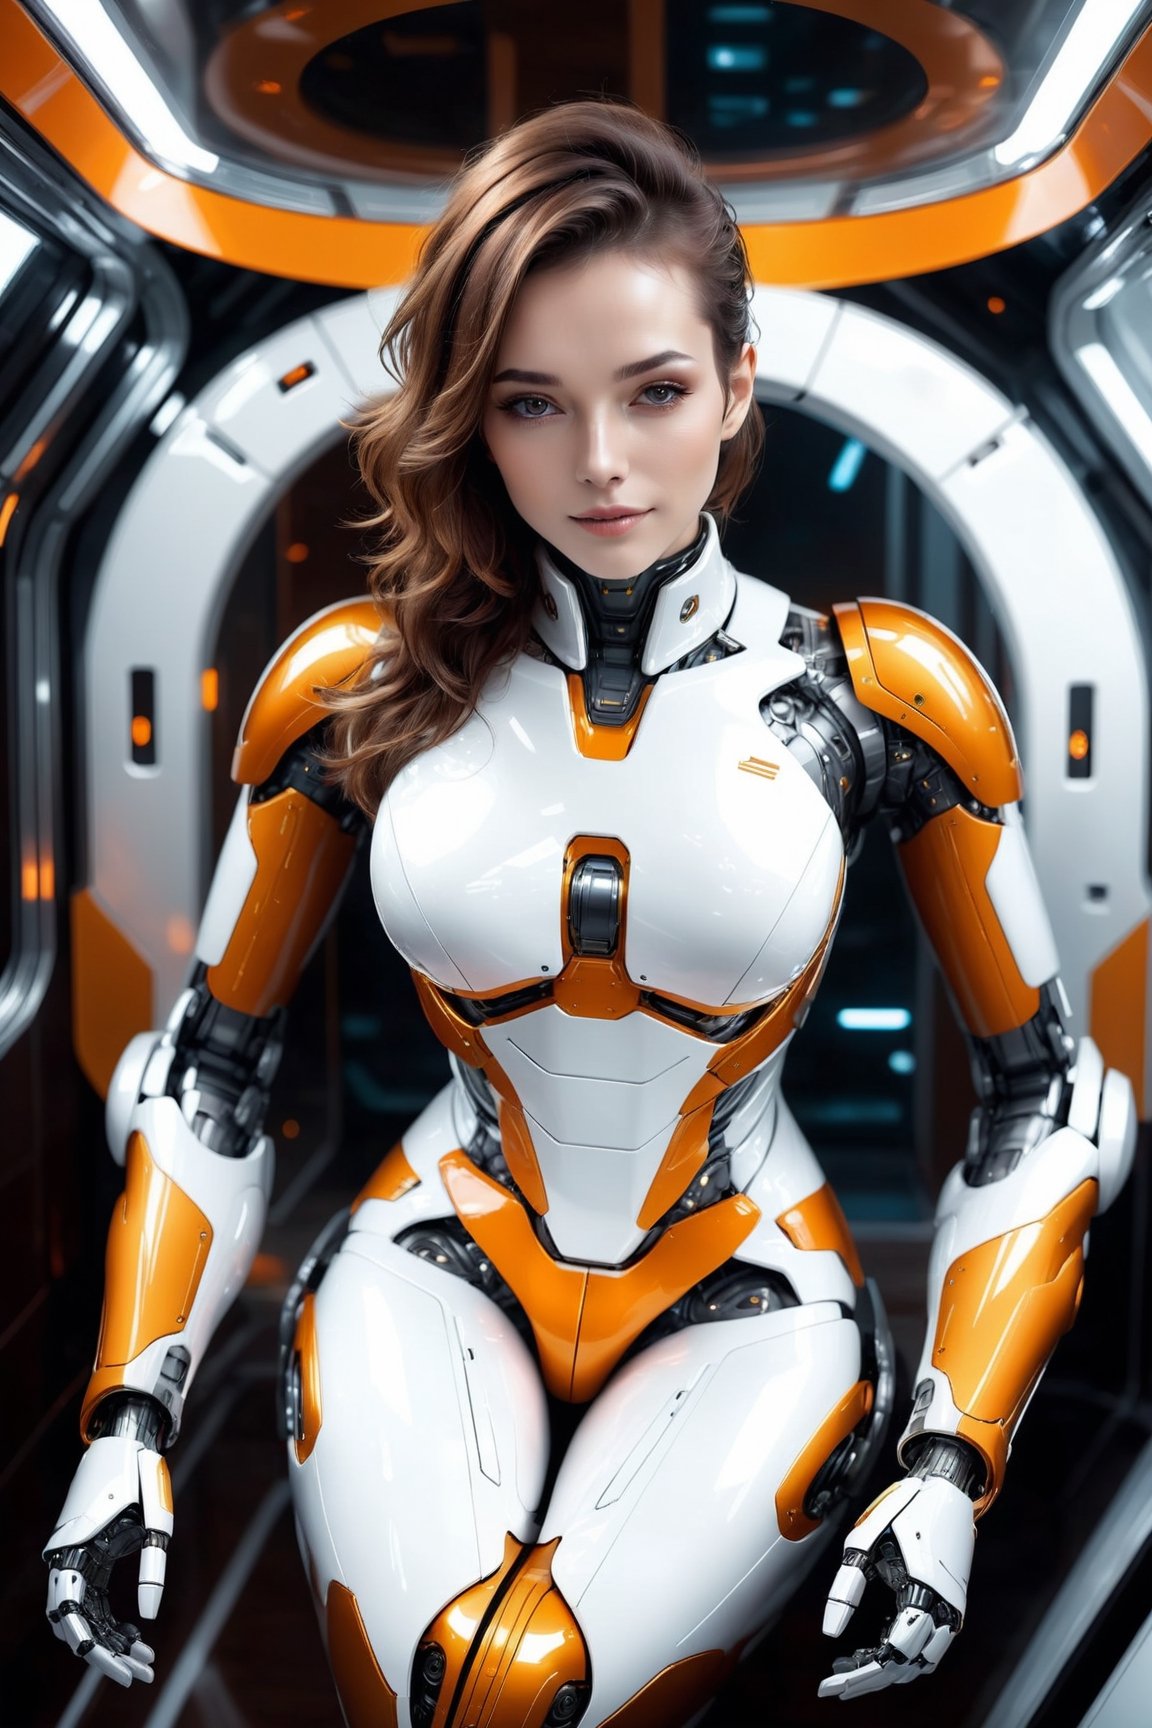 Generating ultra-realistic images of female robots. Lying in a private bedroom in a spaceship, futuristic minimalist interior design, glass elements, spcrft, smile, brown hair, (transparent parts), chrometech,((top view:1.5))orange and white metal suit